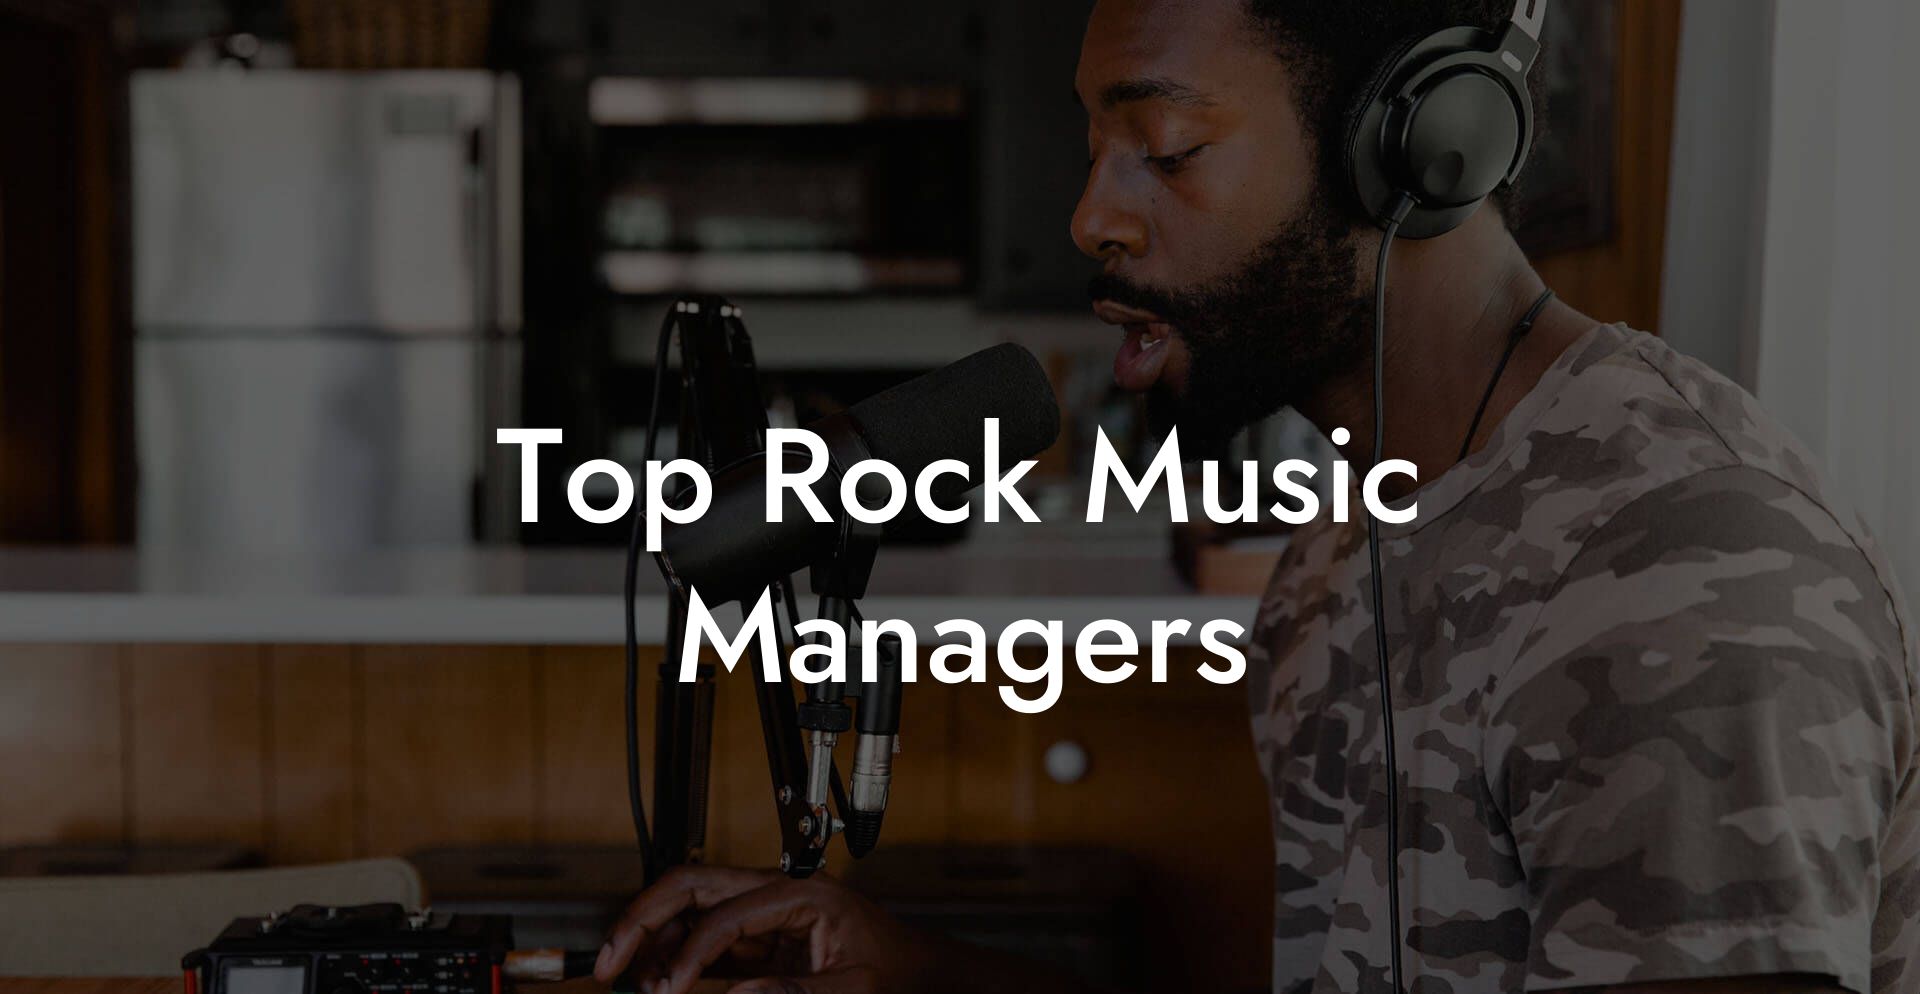 Top Rock Music Managers